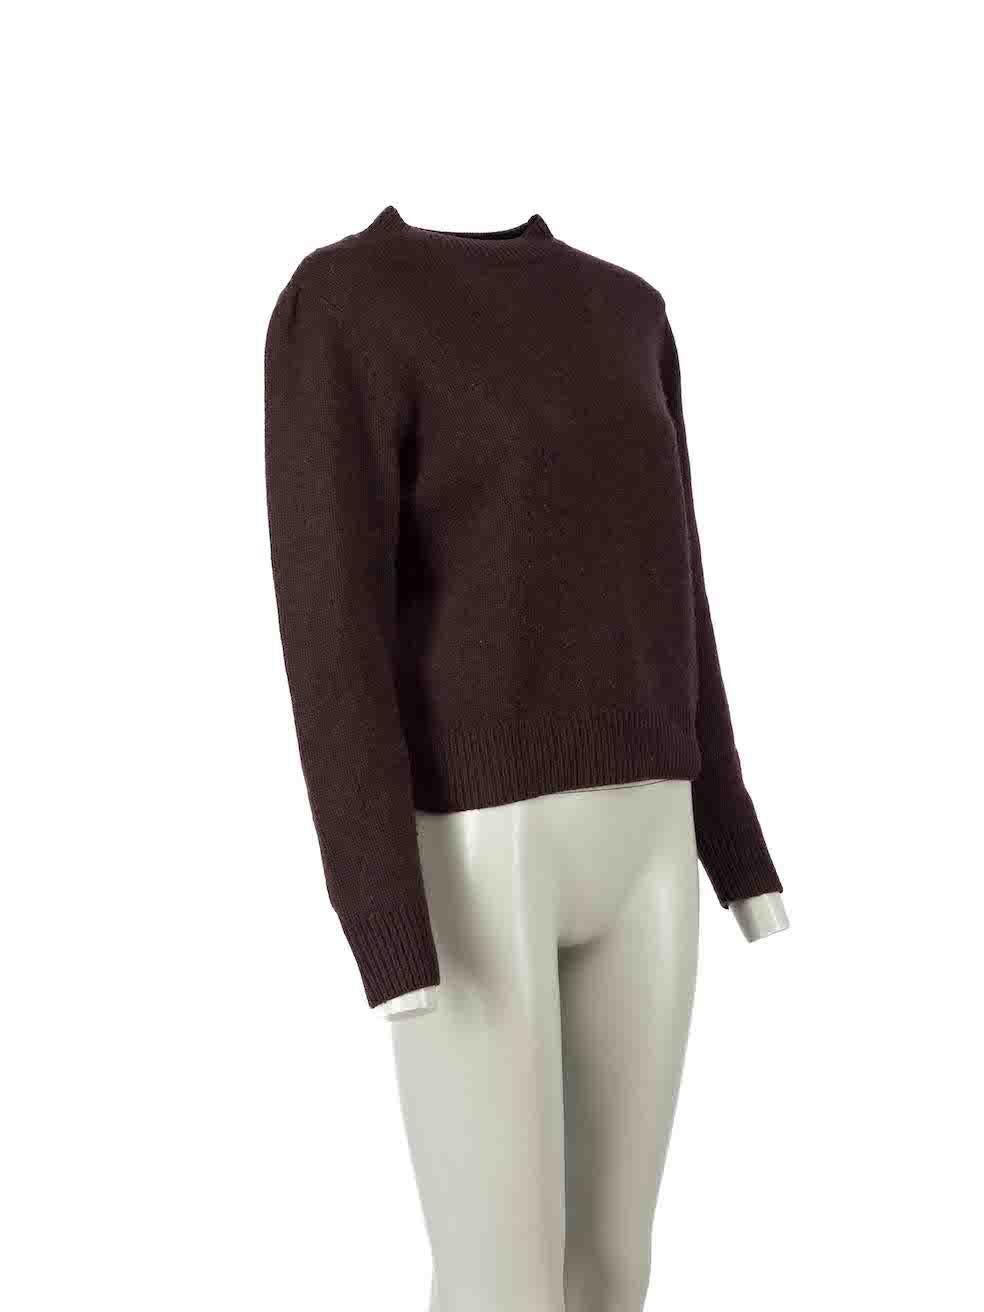 CONDITION is Very good. Minimal wear to jumper is evident. Minimal pilling to overall wool material on this used Dries Van Noten designer resale item.
 
Details
Dark plum
Wool
Knit jumper
Long sleeves
Round neck
 
Made in China
 
Composition
100%